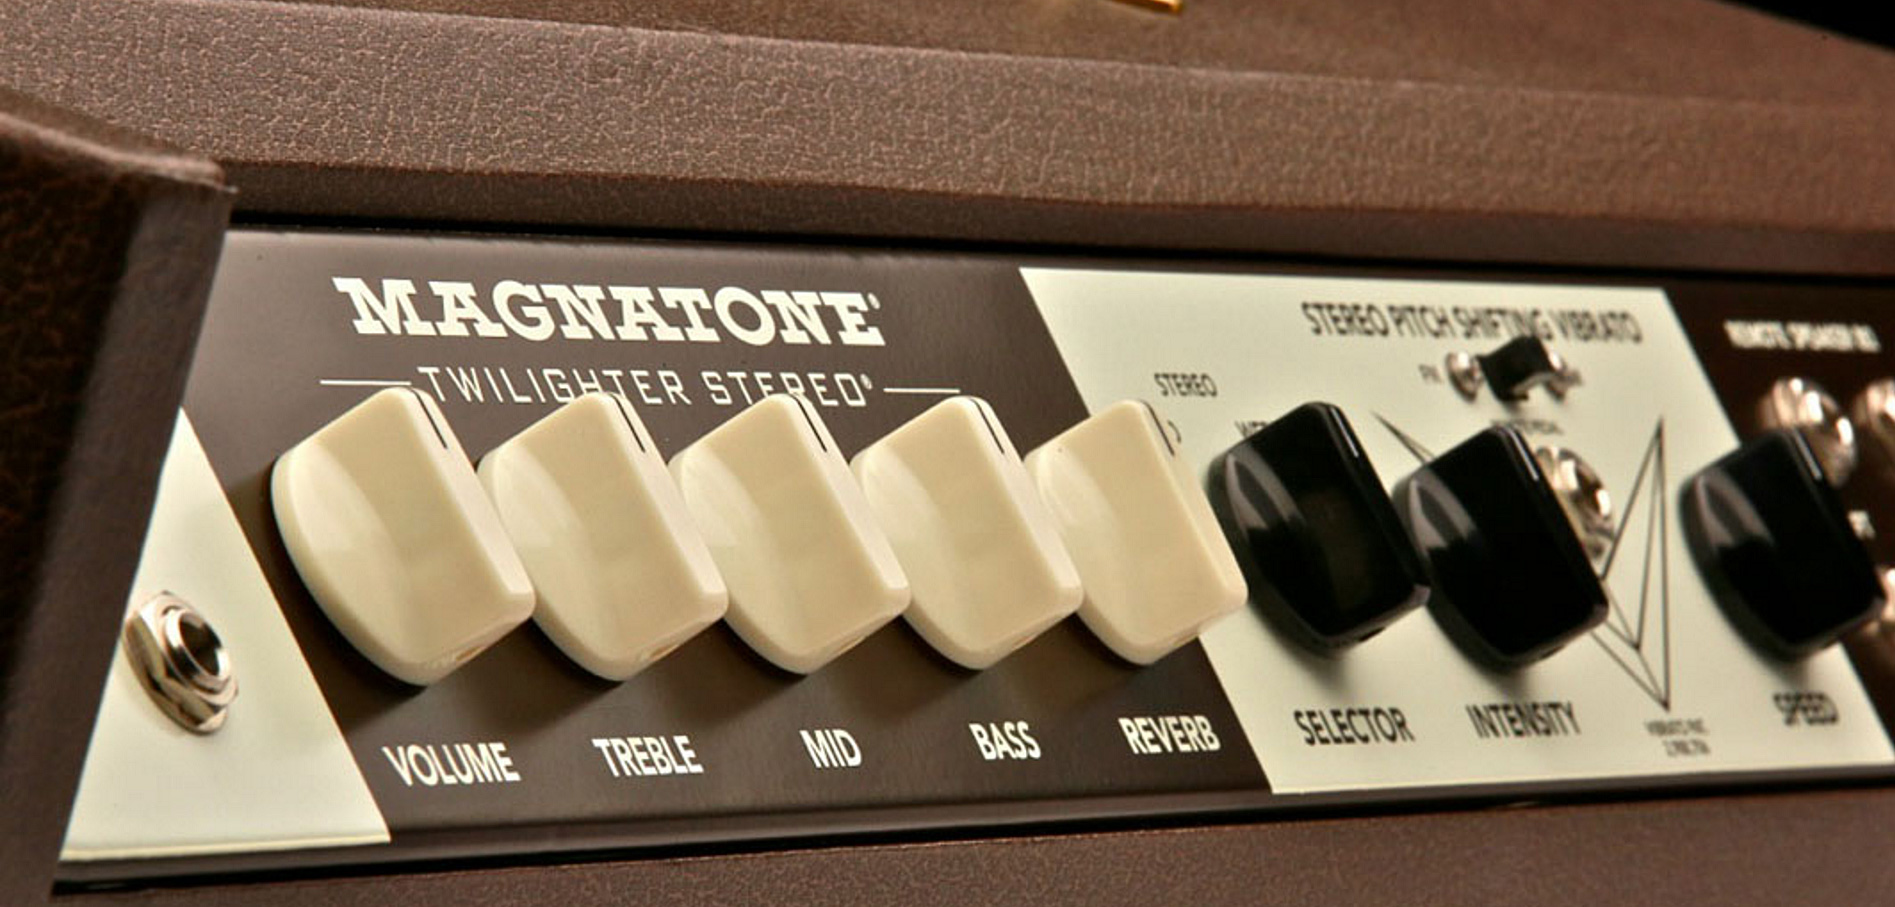 Magnatone Traditional Collection Twilighter Stereo 2x22w 2x12 - Electric guitar combo amp - Variation 2